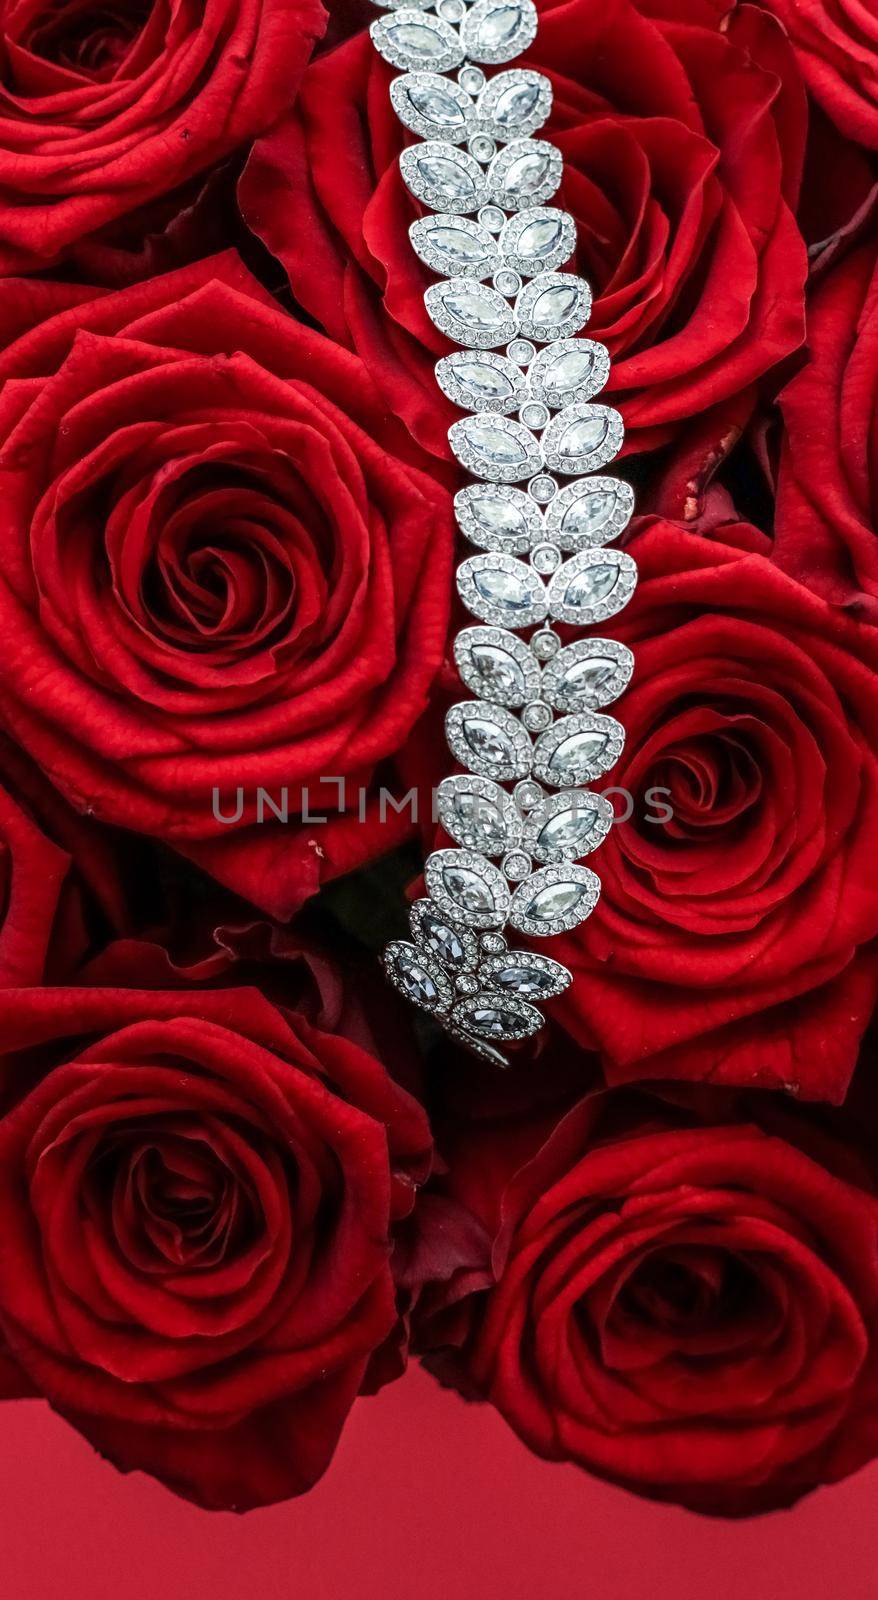 Gemstone jewellery, wedding fashion and luxe shopping concept - Luxury diamond bracelet and bouquet of red roses, jewelry love gift on Valentines Day and romantic holidays present